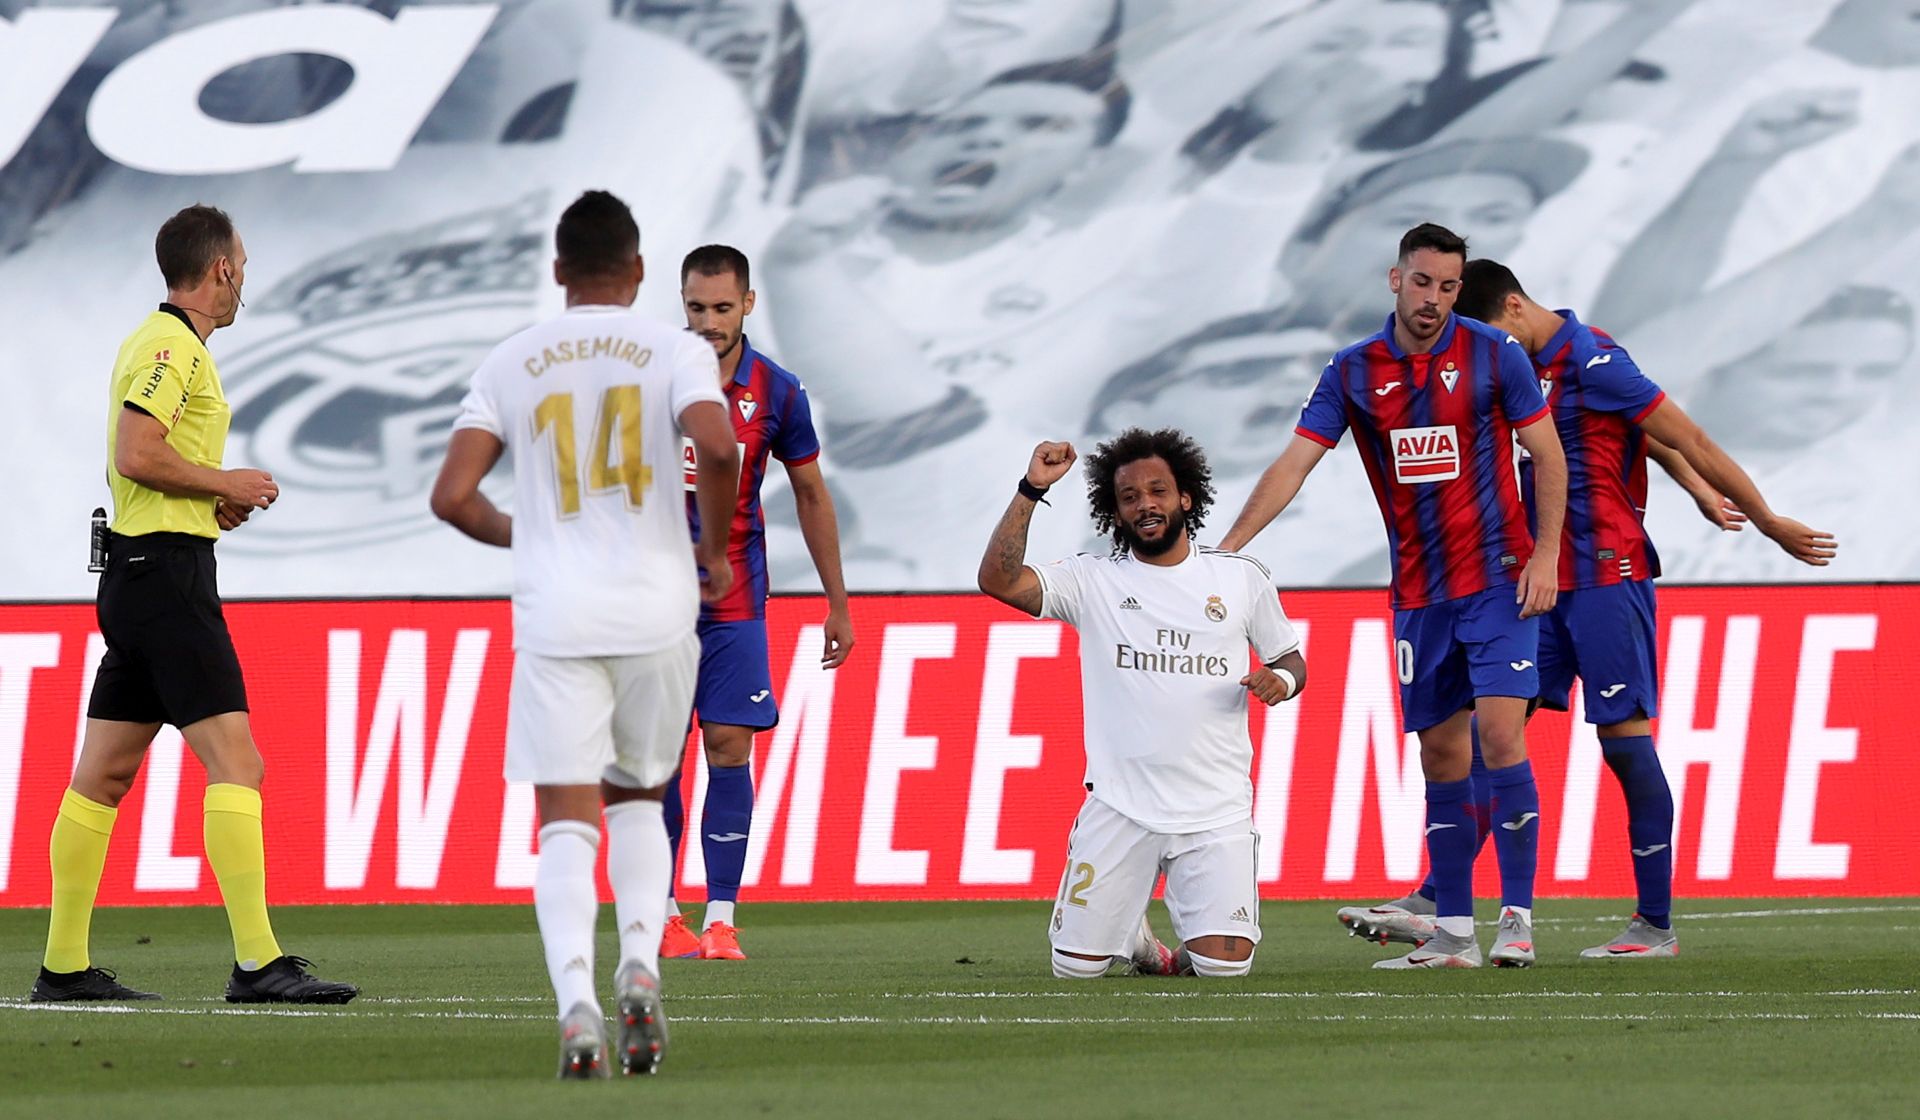 epa08485508 Real Madrid's Marcelo (C) celebrates after scoring the 3-0 lead during the Spanish LaLiga soccer match between Real Madrid and SD Eibar behind closed doors at Di Stefano stadium in Madrid, Spain, 14 June 2020.  EPA/Kiko Huesca